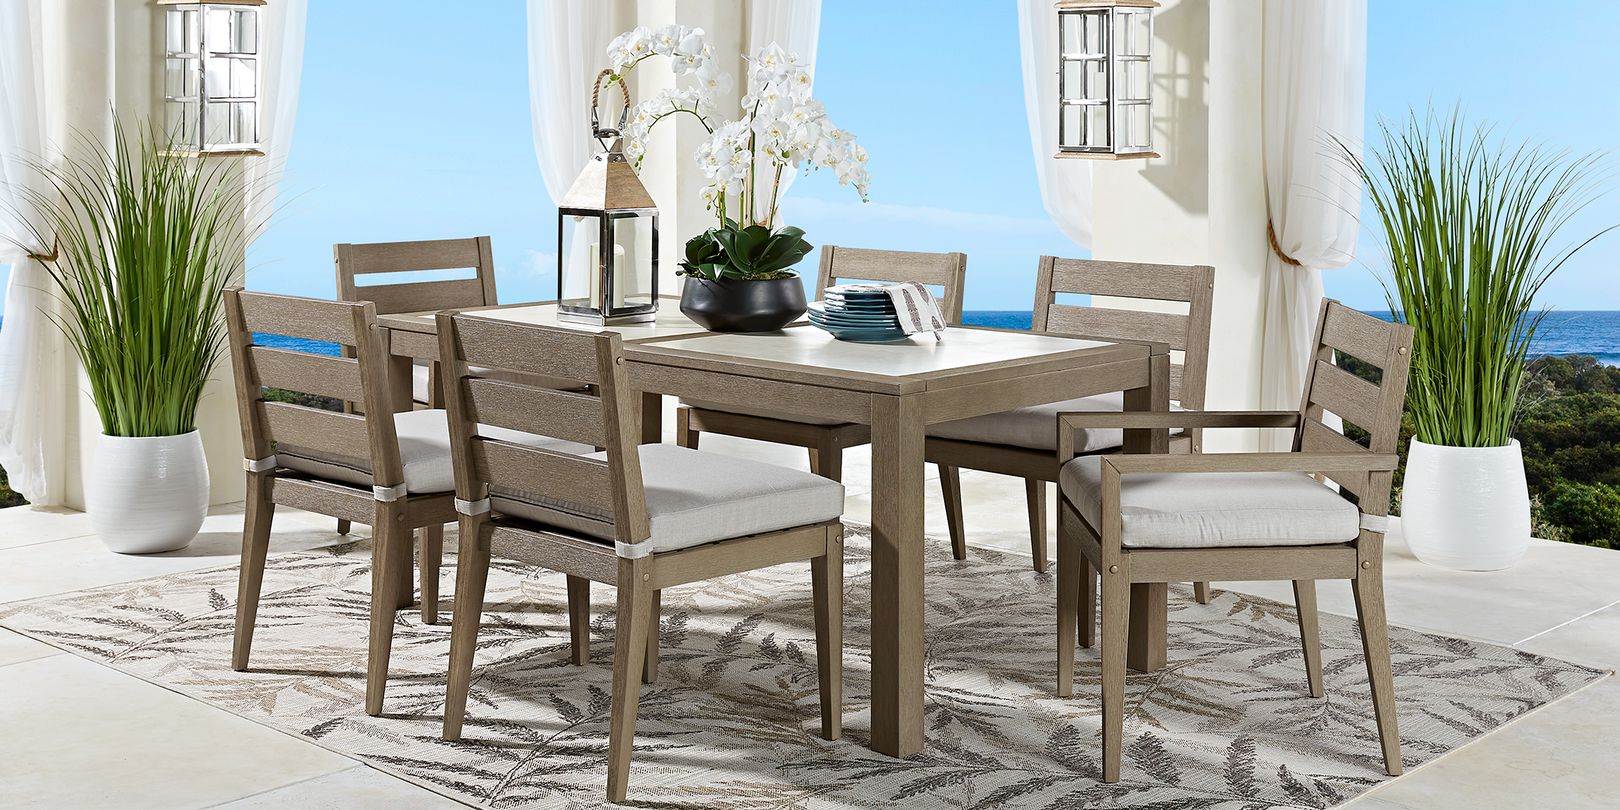 photo of gray dining set with plants